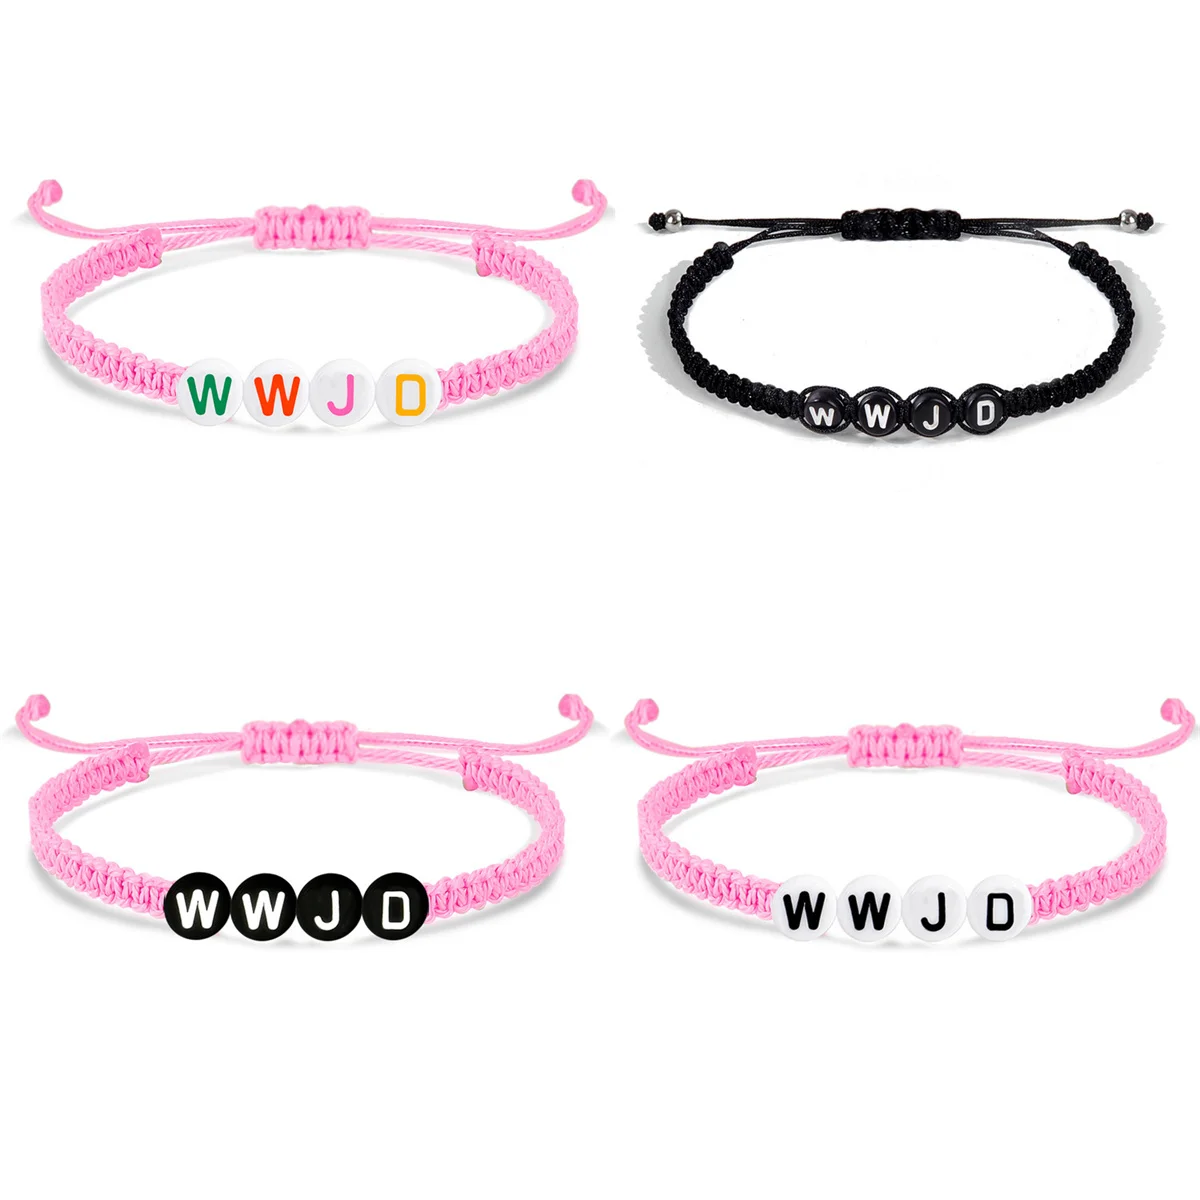 

WWJD Rope Beaded Adjustable Bracelet What Would Jesus Do Woven Wristbands Bracelet for Women Men Jewelry Colorful Gifts Braied